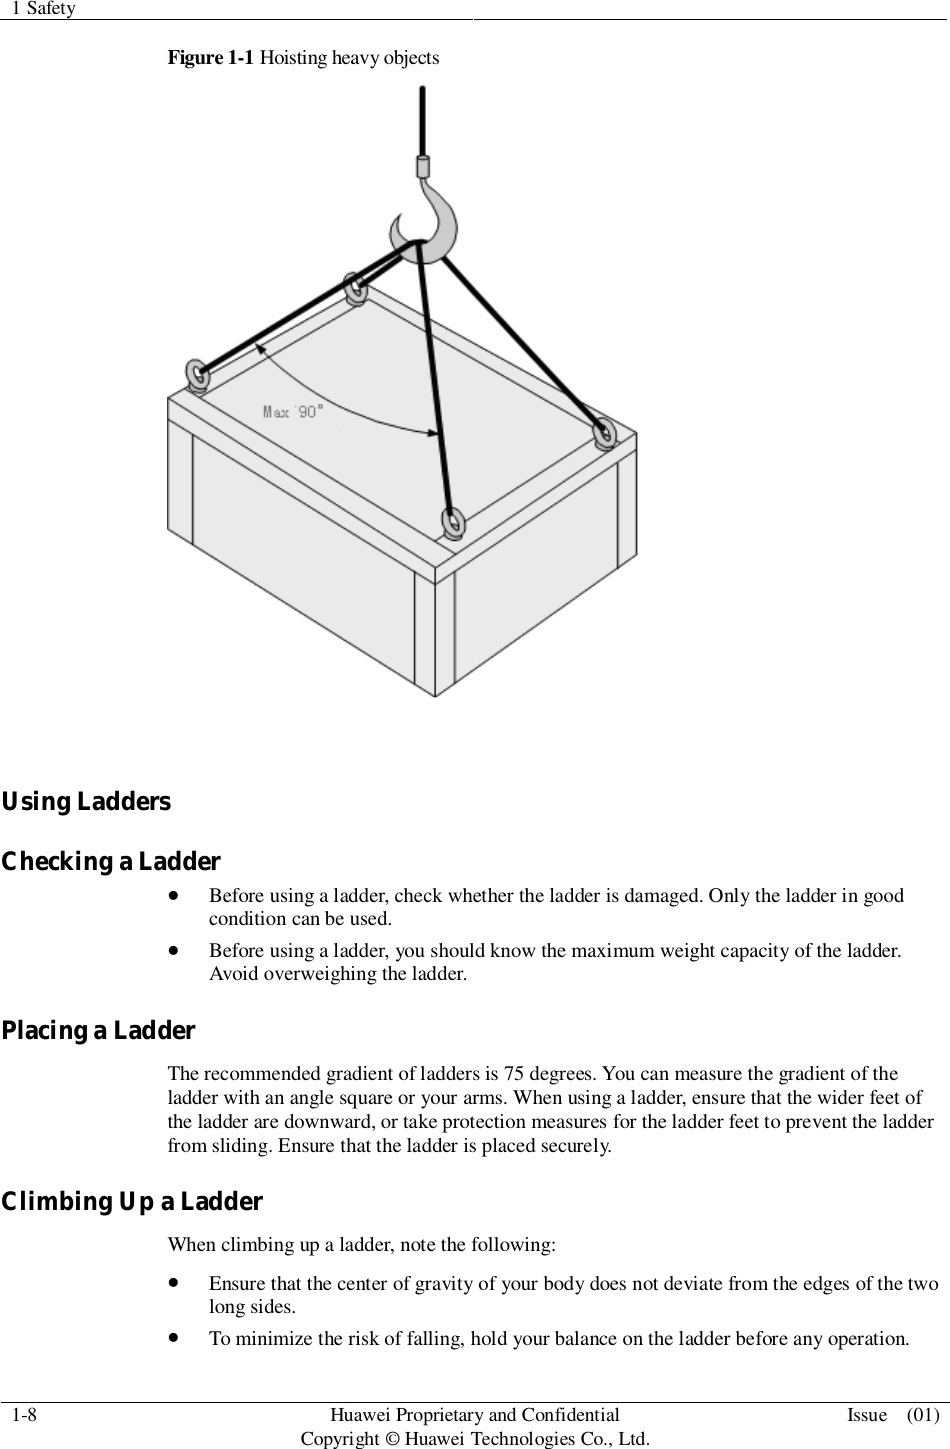 1 Safety1-8 HuaweiProprietary and ConfidentialCopyright © Huawei Technologies Co., Ltd. Issue  (01)Figure 1-1 Hoisting heavy objectsUsing LaddersChecking a LadderBefore using a ladder, check whether the ladder is damaged. Only the ladder in goodcondition can be used.Before using a ladder, you should know the maximum weight capacity of the ladder.Avoid overweighing the ladder.Placing a LadderThe recommended gradient of ladders is 75 degrees. You can measure the gradient of theladder with an angle square or your arms. When using a ladder, ensure that the wider feet ofthe ladder are downward, or take protection measures for the ladder feet to prevent the ladderfrom sliding. Ensure that the ladder is placed securely.Climbing Up a LadderWhen climbing up a ladder, note the following:Ensure that the center of gravity of your body does not deviate from the edges of the twolong sides.To minimize the risk of falling, hold your balance on the ladder before any operation.